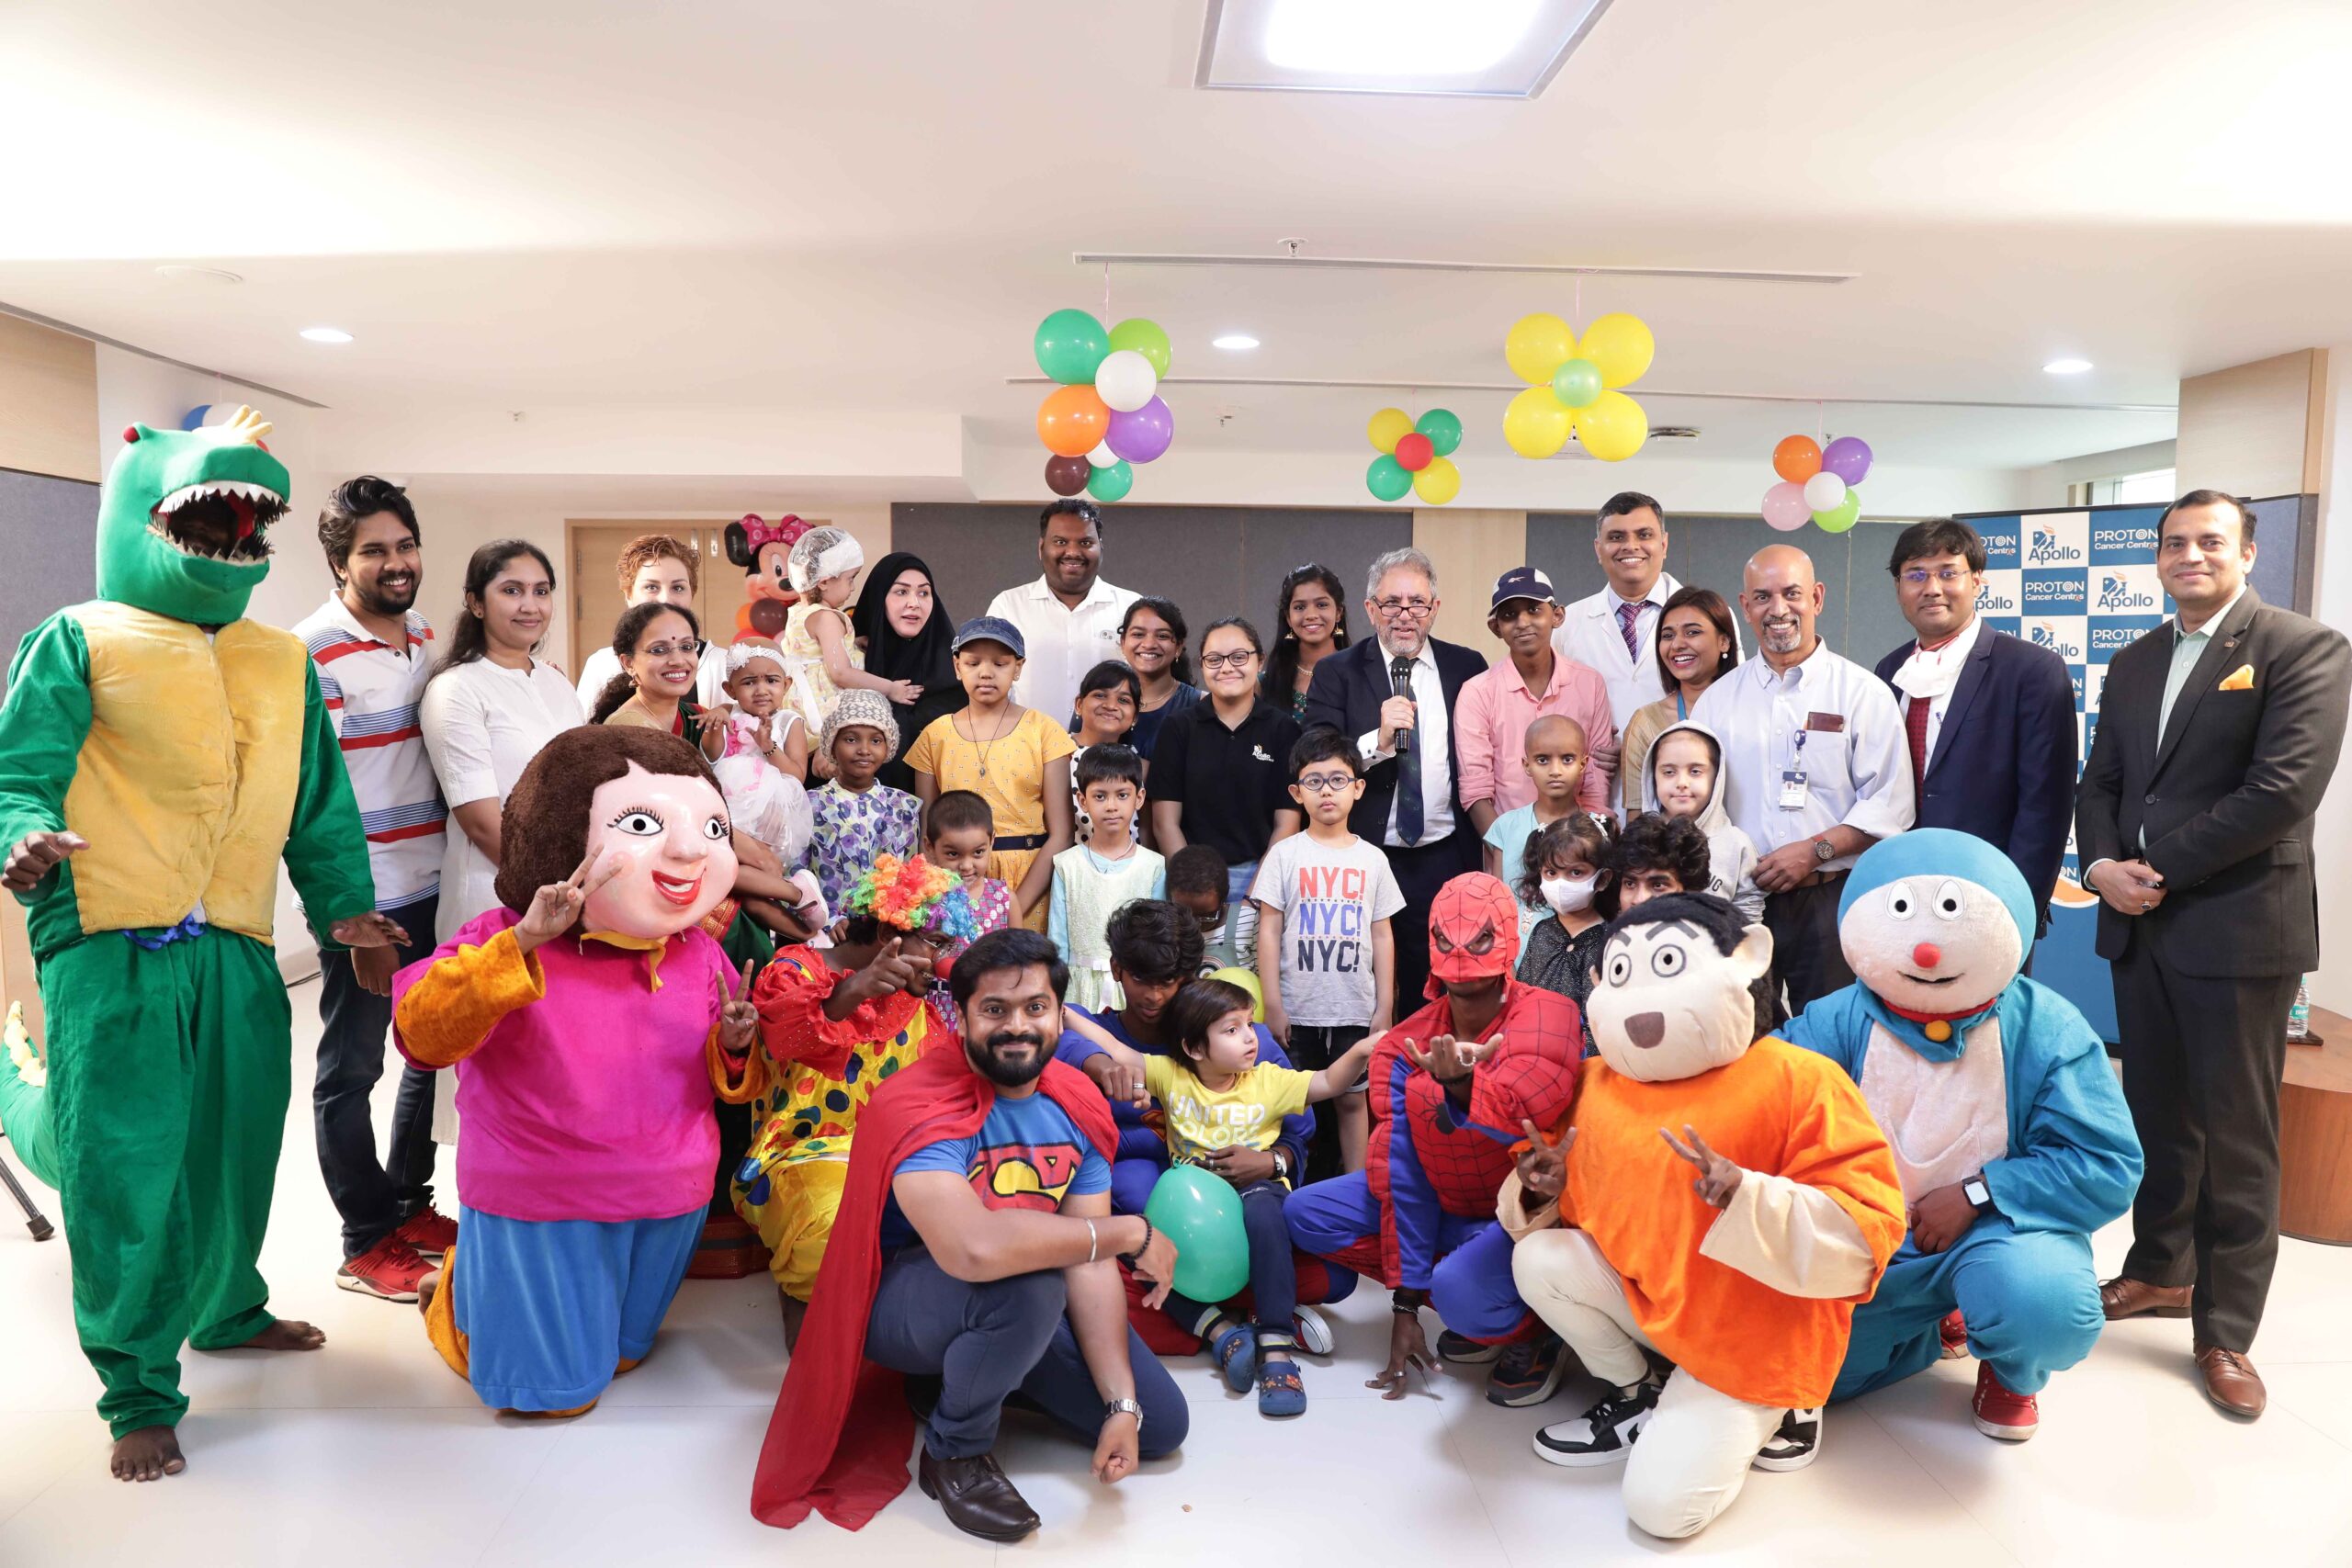 Apollo Proton Cancer Centre celebrates Children’s Day – “Reel Heroes meets Real Heroes”